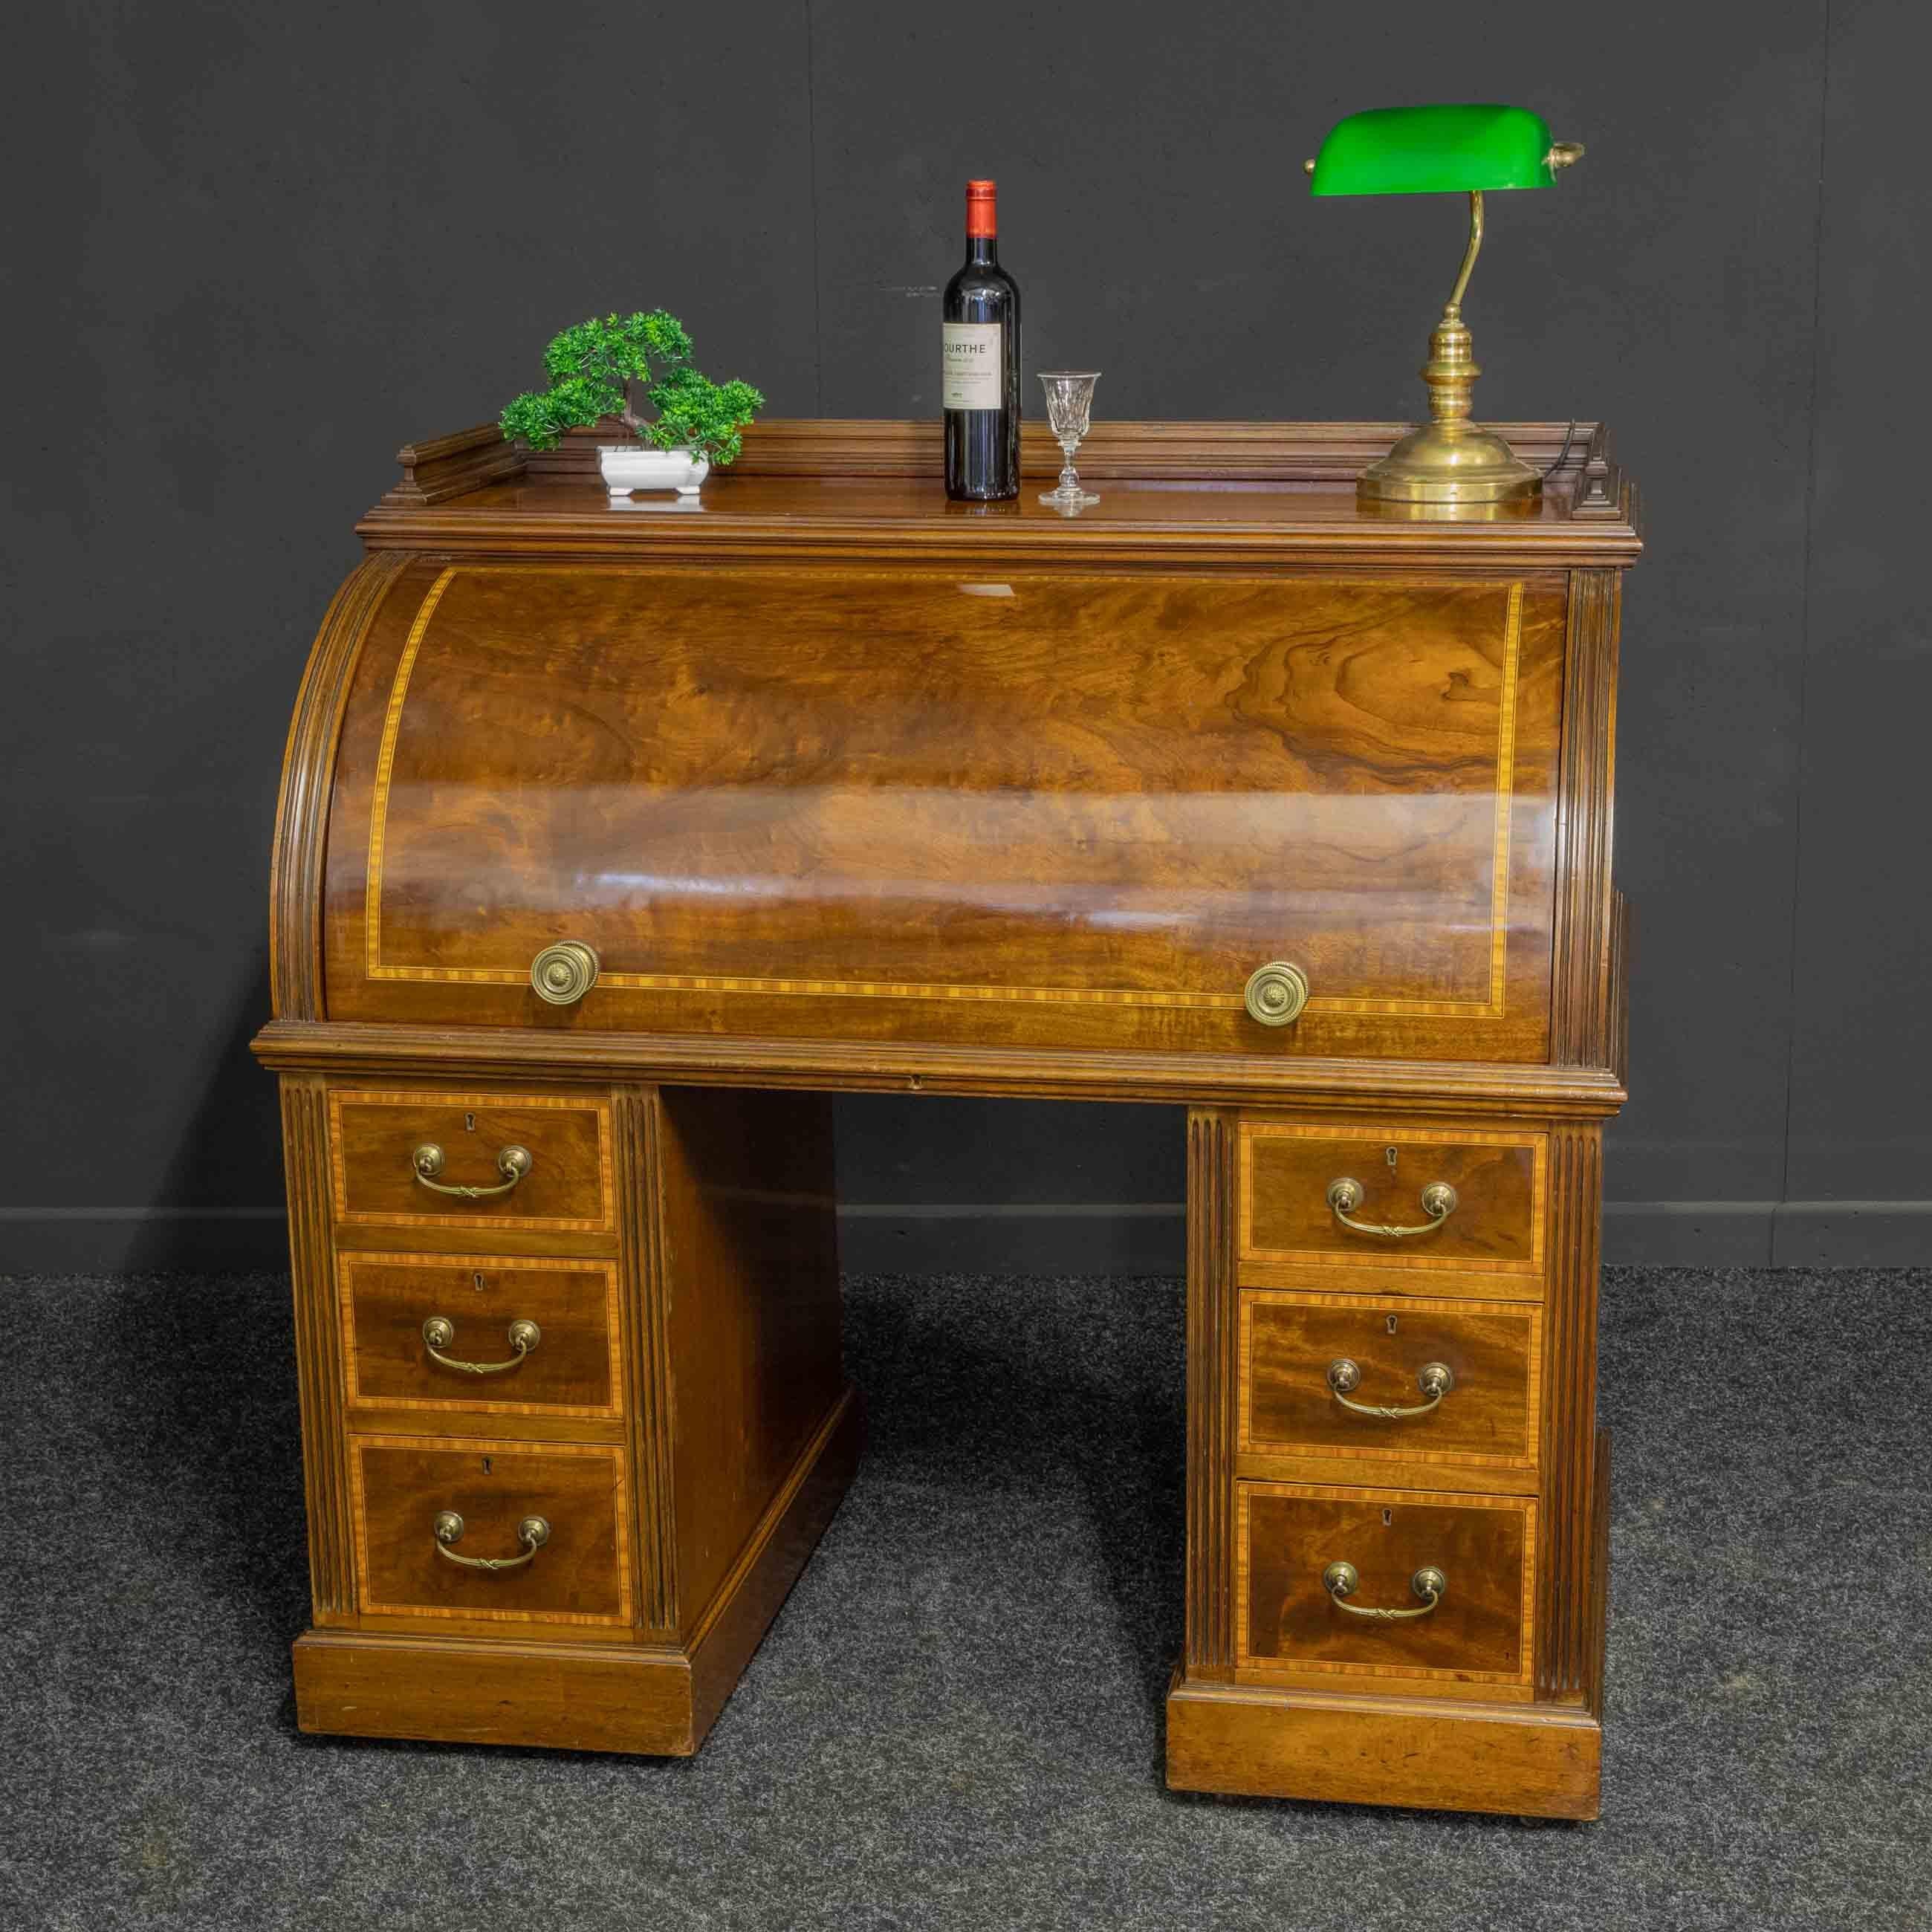 A superb late Victorian Sheraton revival mahogany cylinder desk of attractive proportions. The base has a pair of three drawer pedestals all with beautiful satinwood and ebony crossbanding, which runs through to the imposing cylinder top. The